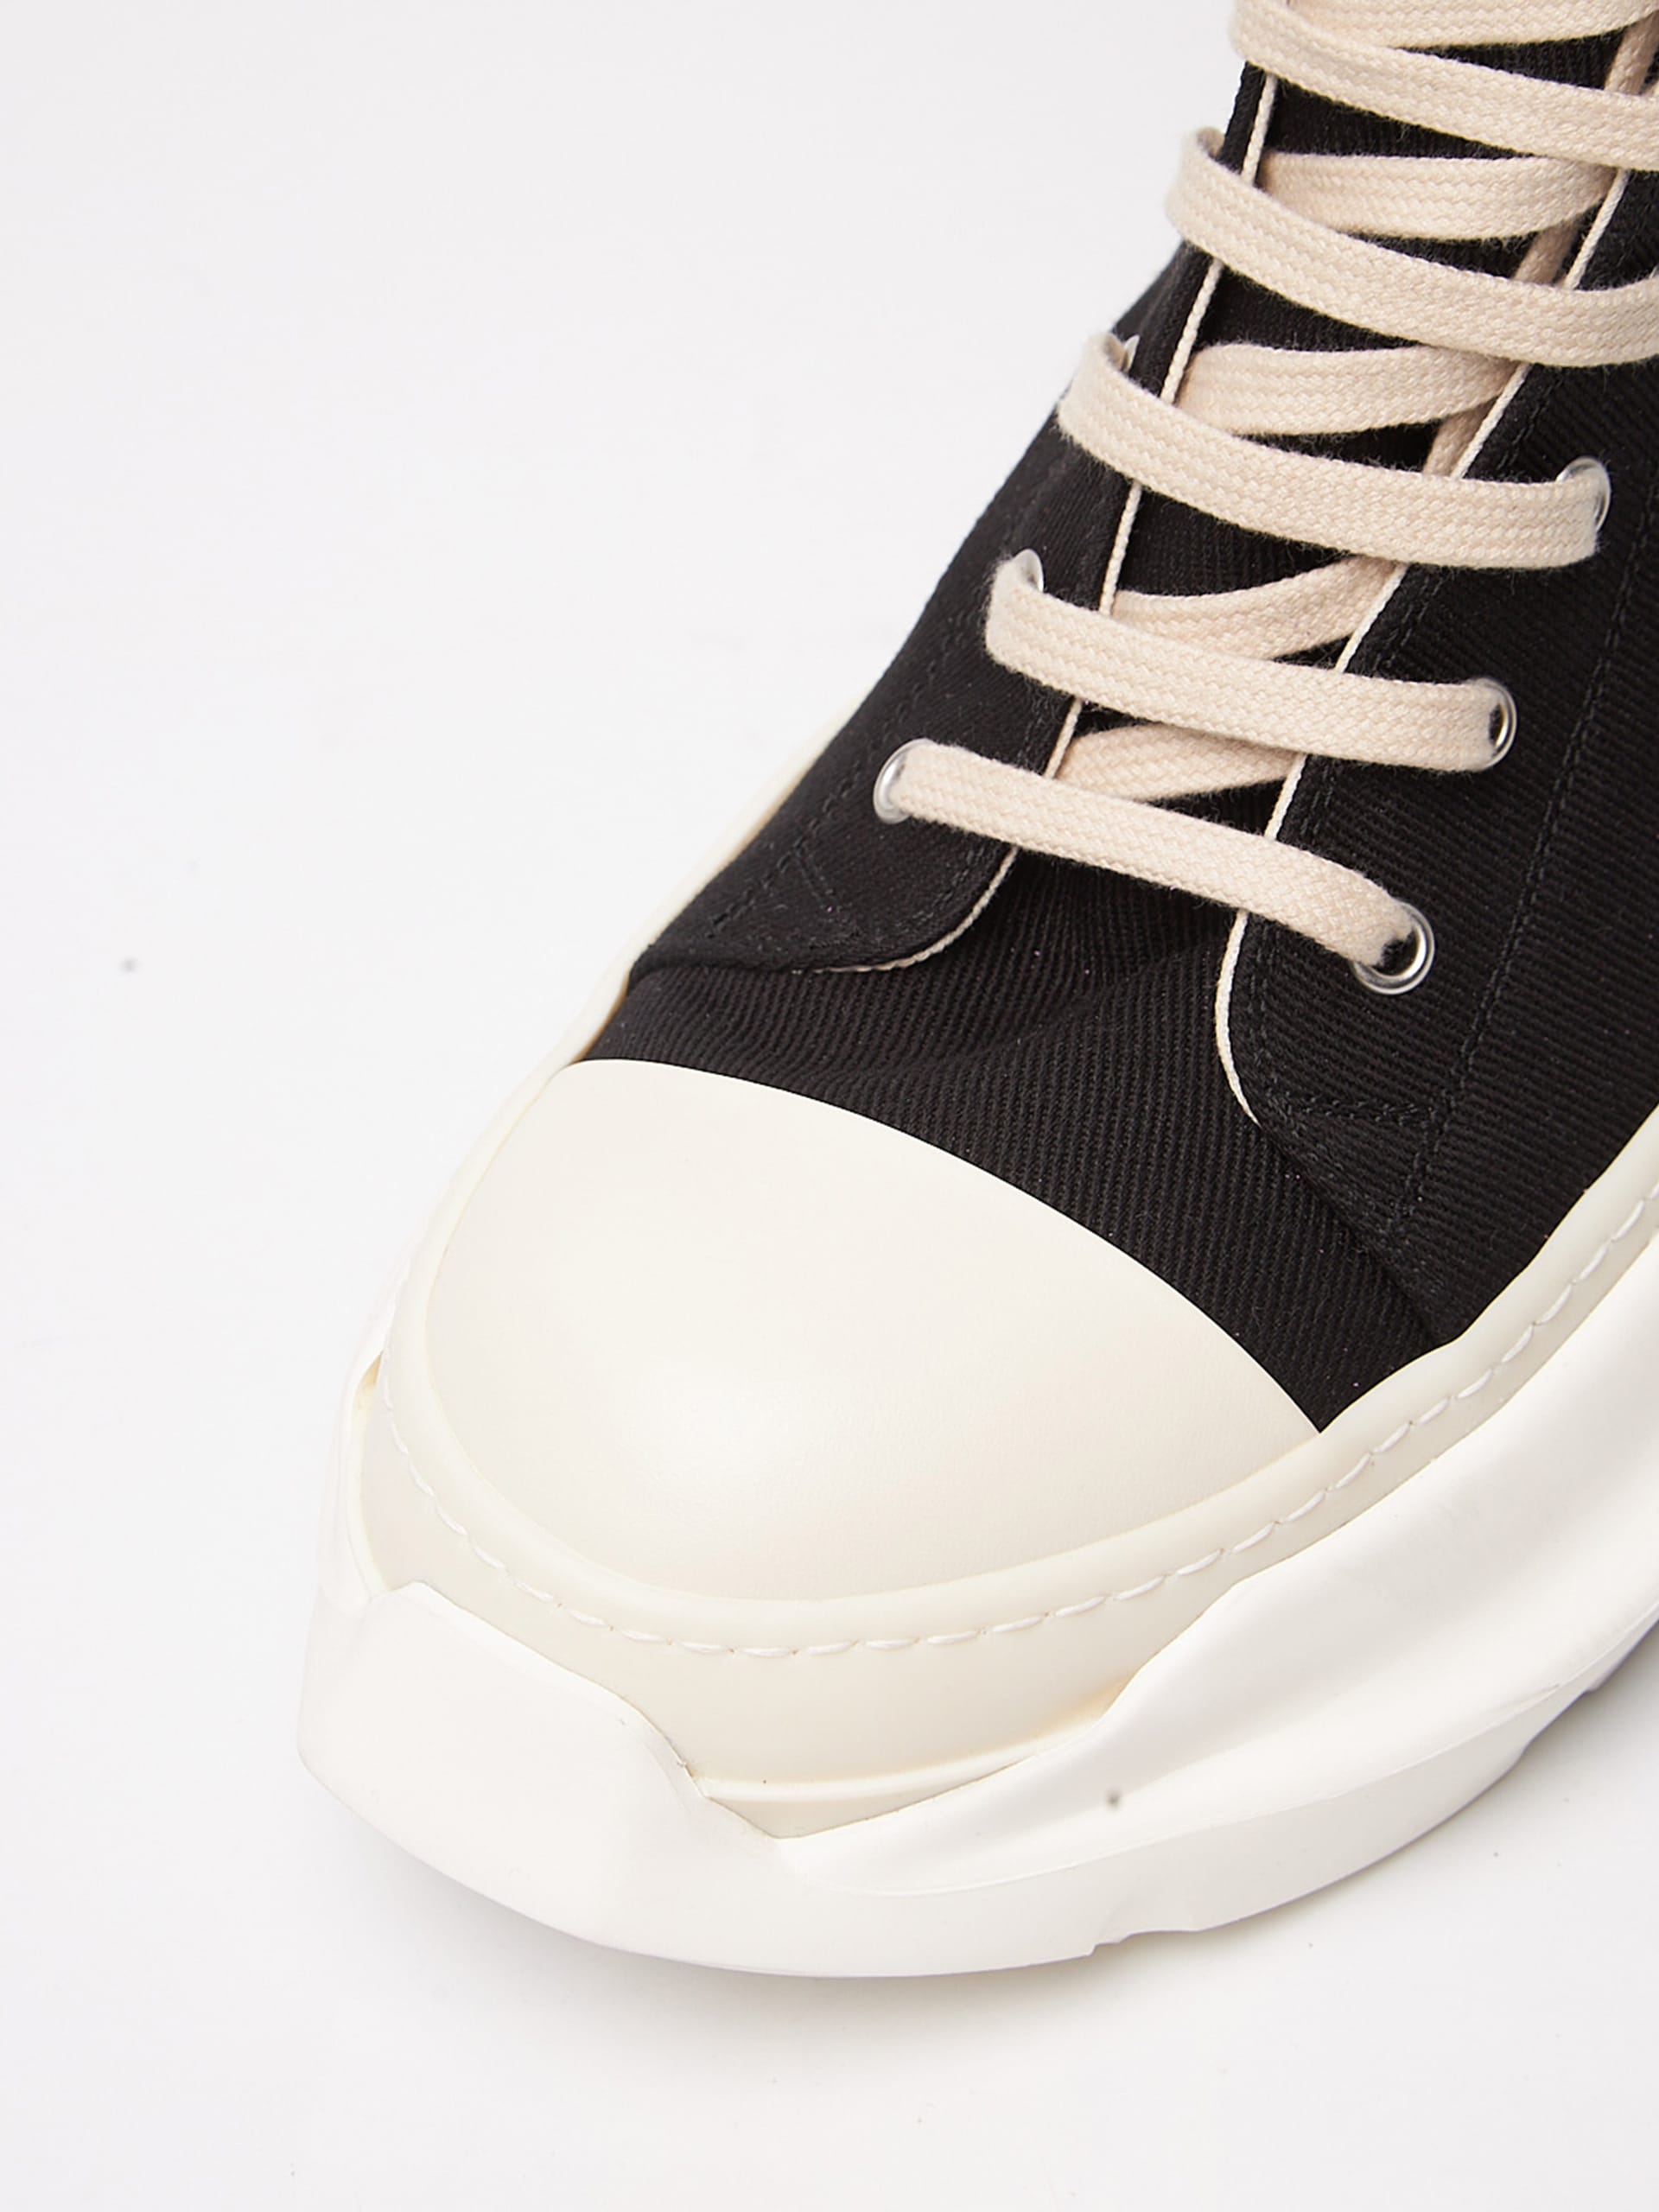 RICK OWENS DRKSHDW ABSTRACT RAMONES LOW WITH CLEAR SOLE. (40